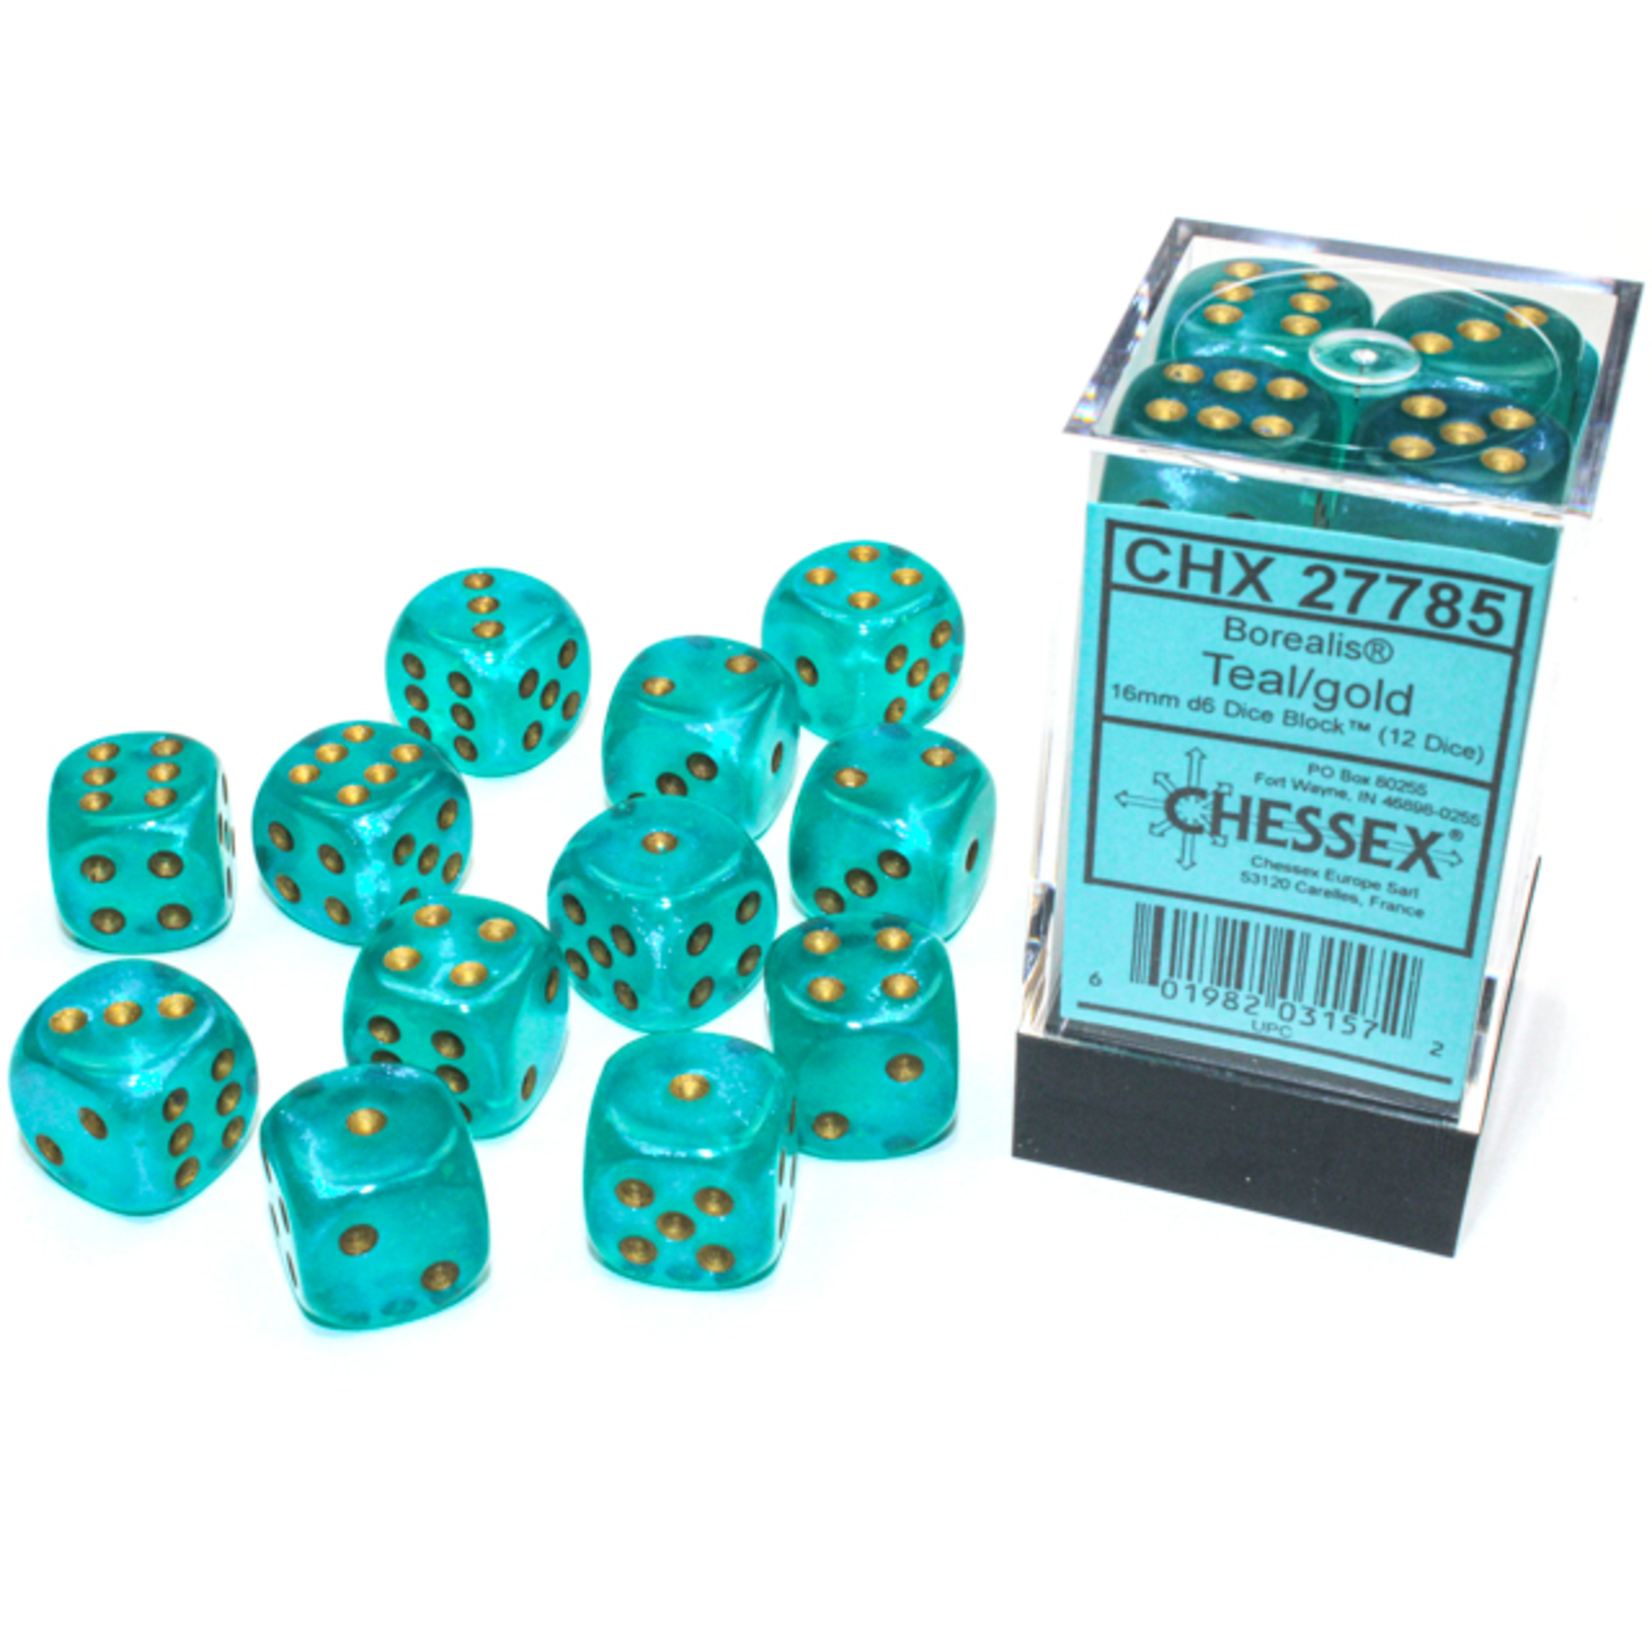 Chessex Borealis Teal With Gold Pips 16 Mm D6 Dice Block for sale online 12 Dice